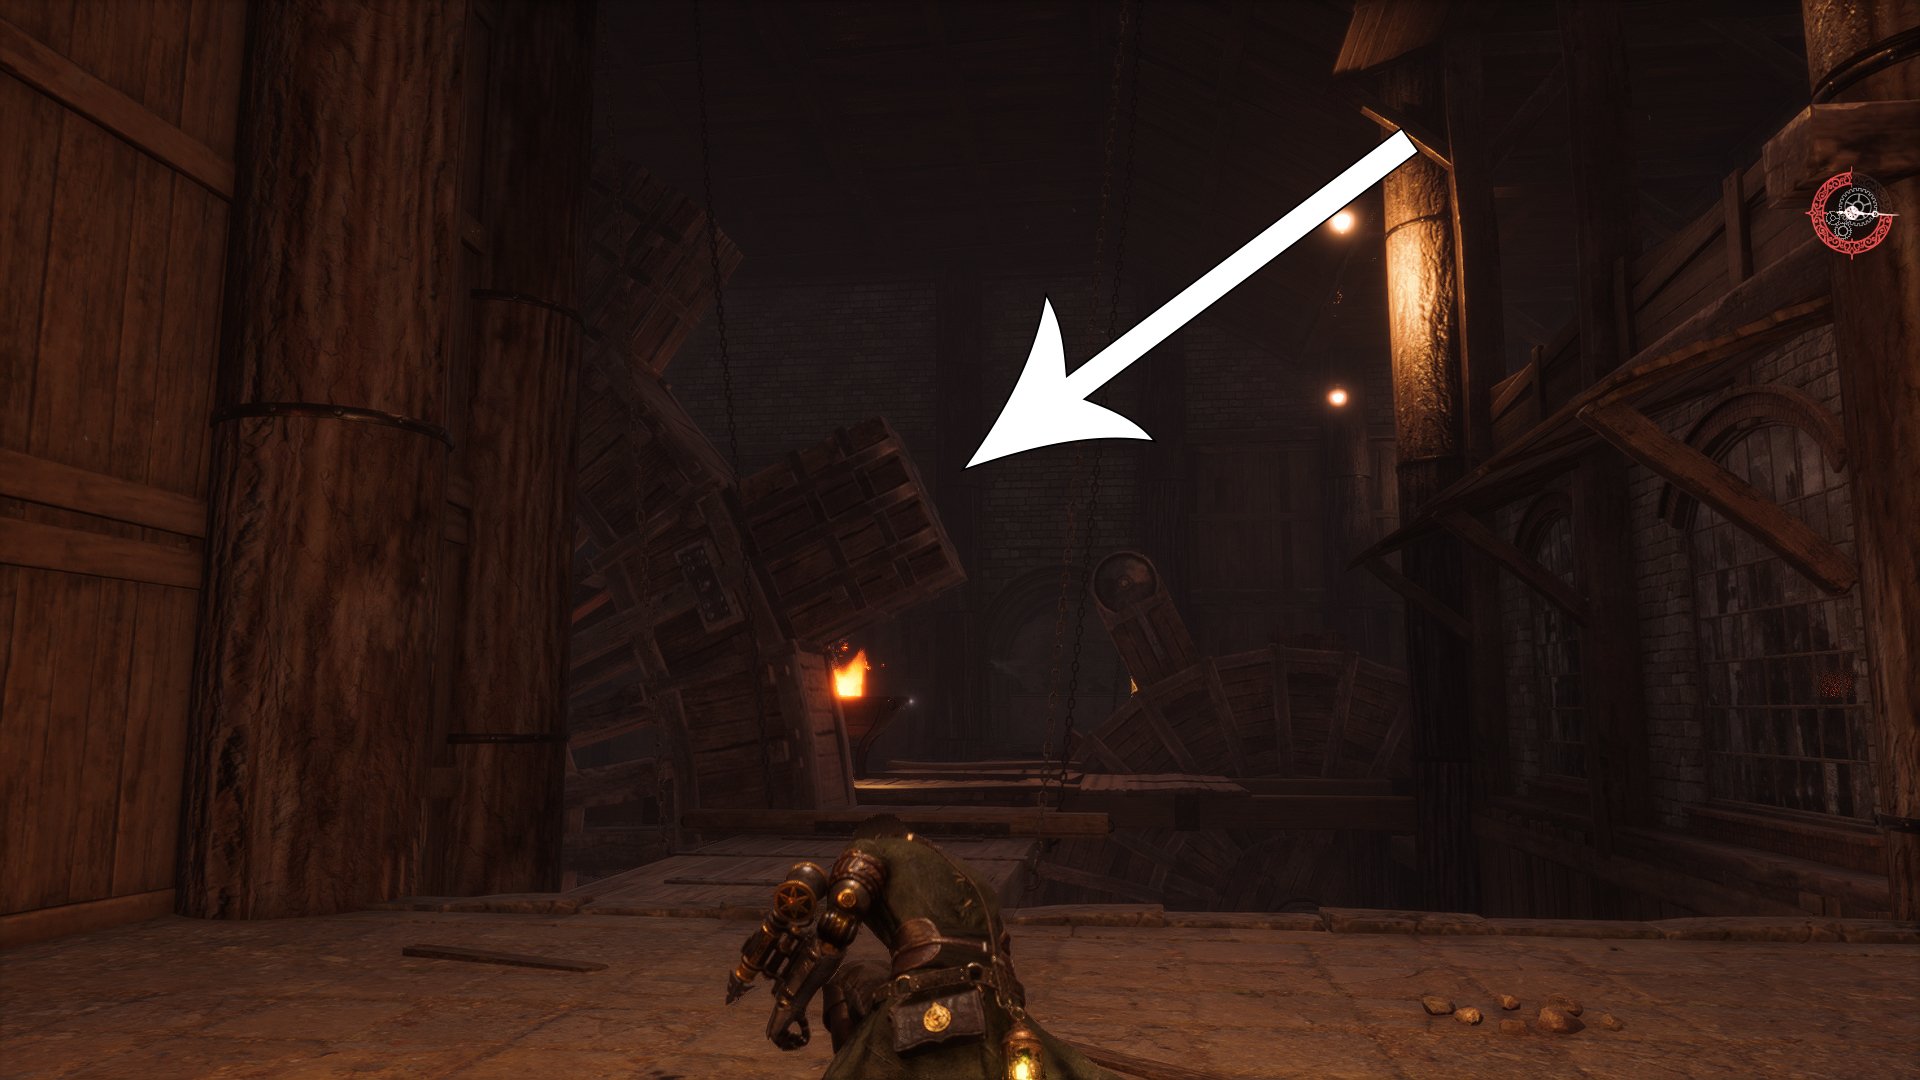 blind man's double sided spear location